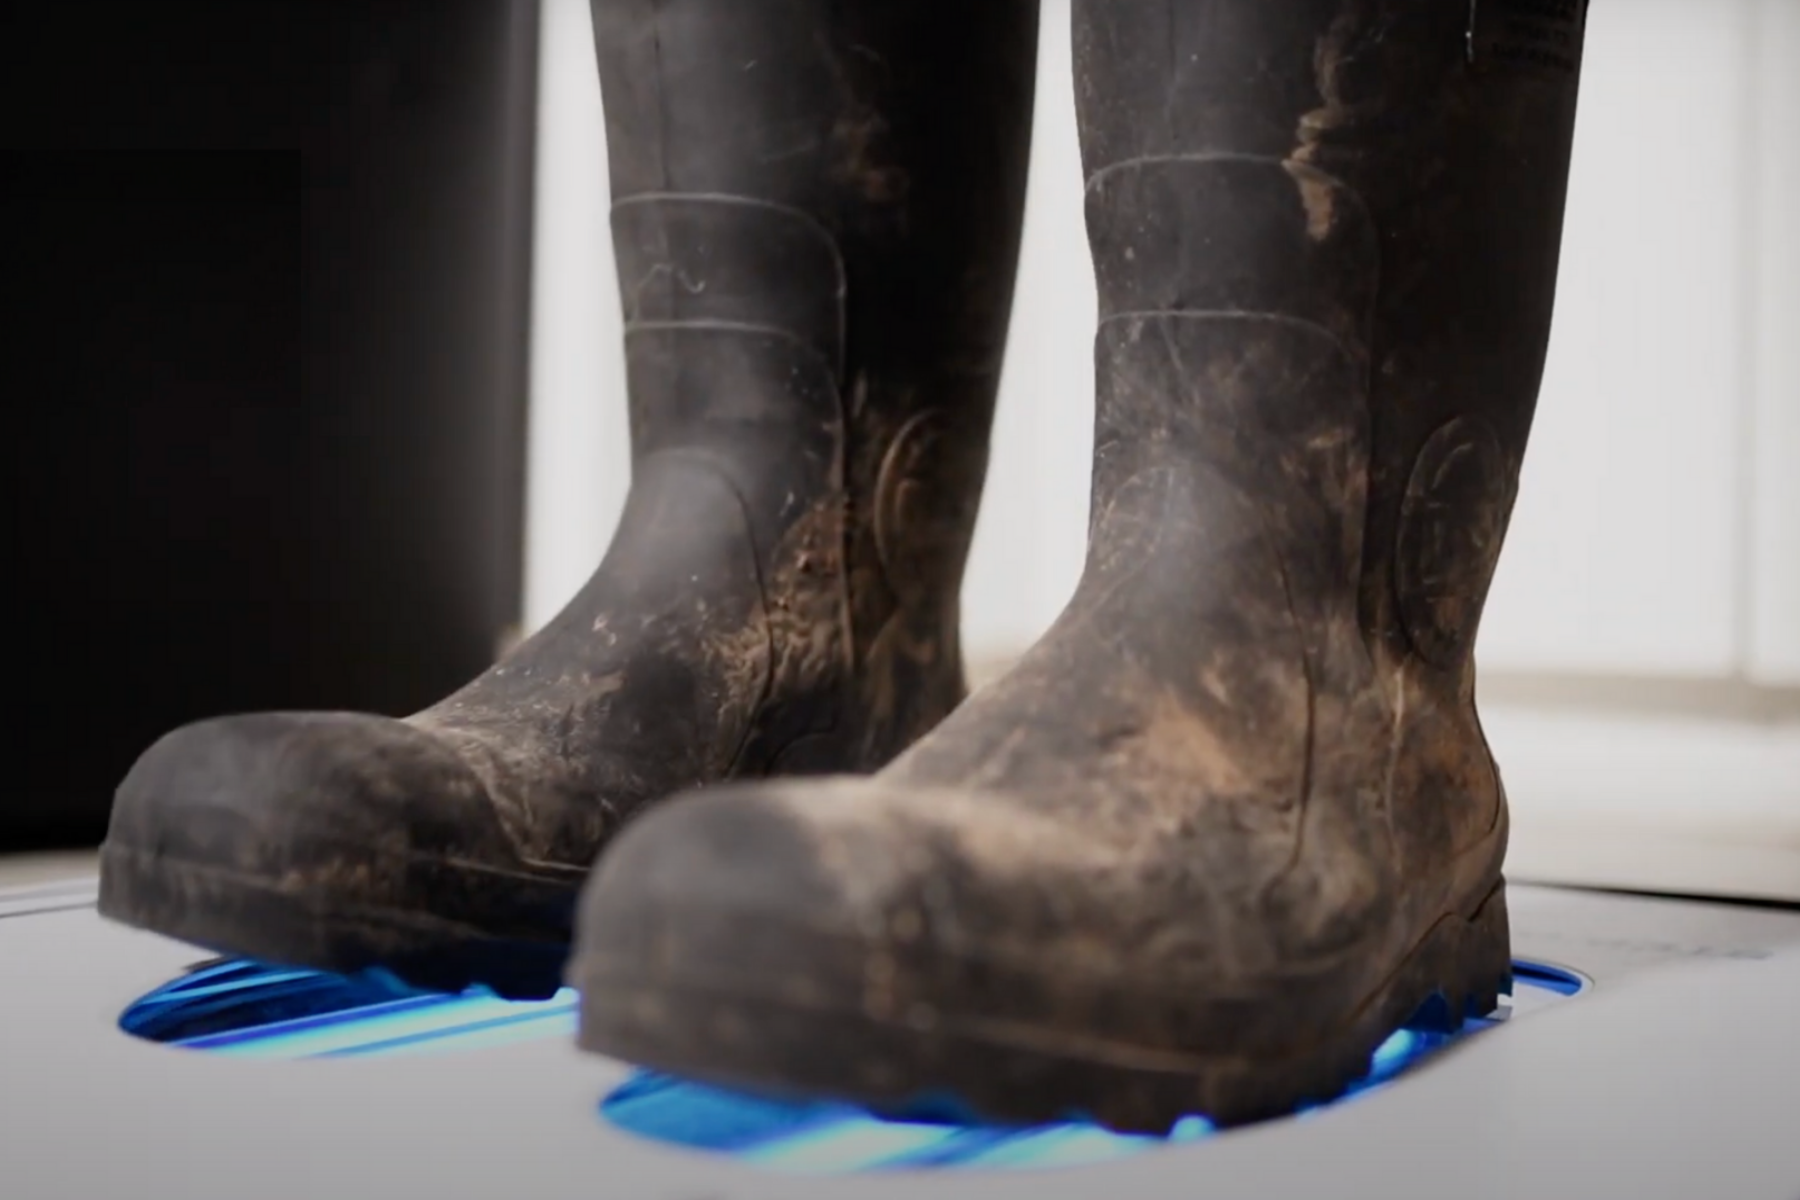 Agricultural boots being disinfected using a shoe sanitizing station